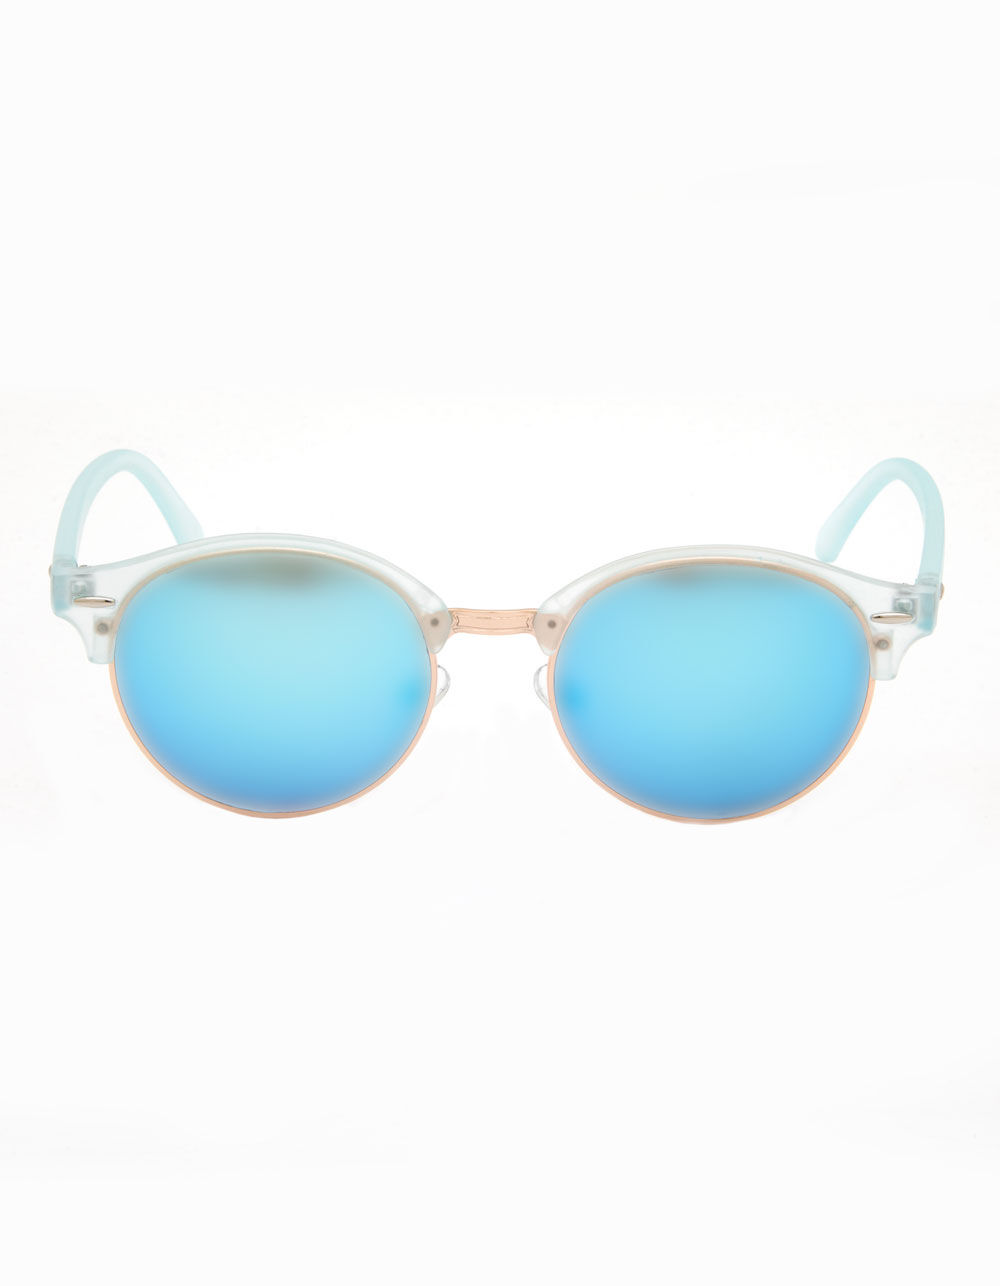 BLUE CROWN Revo Clubmaster Sunglasses image number 1